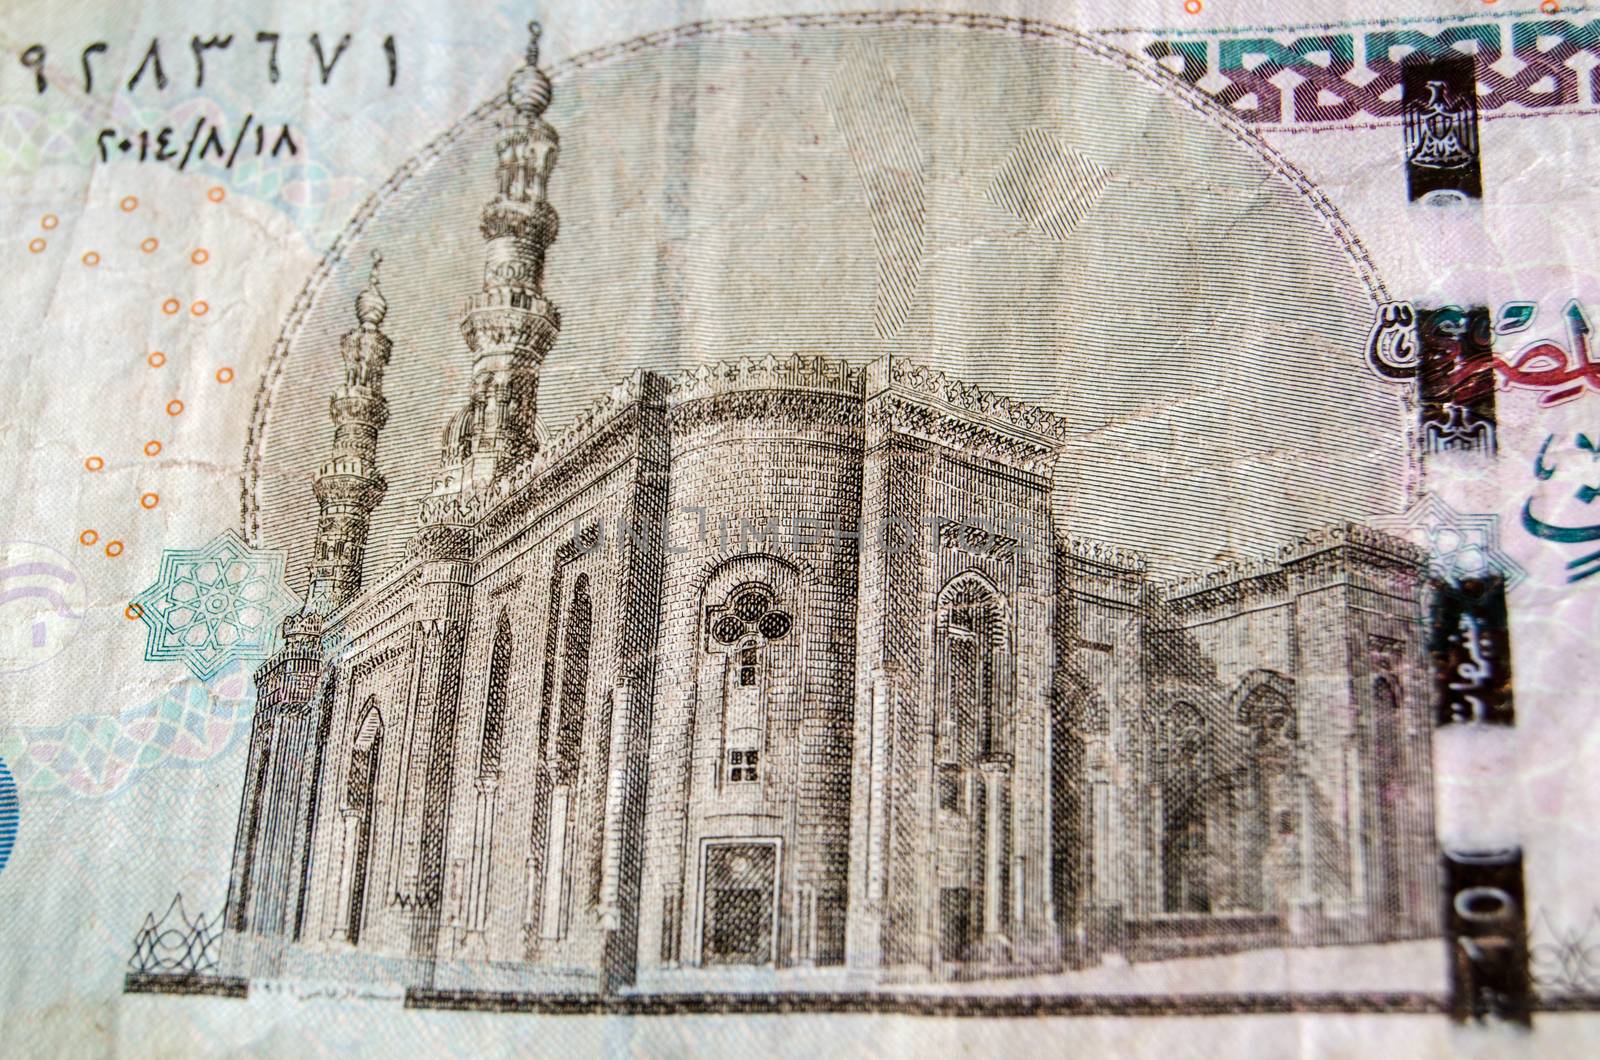 Detail of the Al-Rifai Mosque in Cairo on the back of an Egyptian ten pound note.  Used banknote, photographed at an angle.